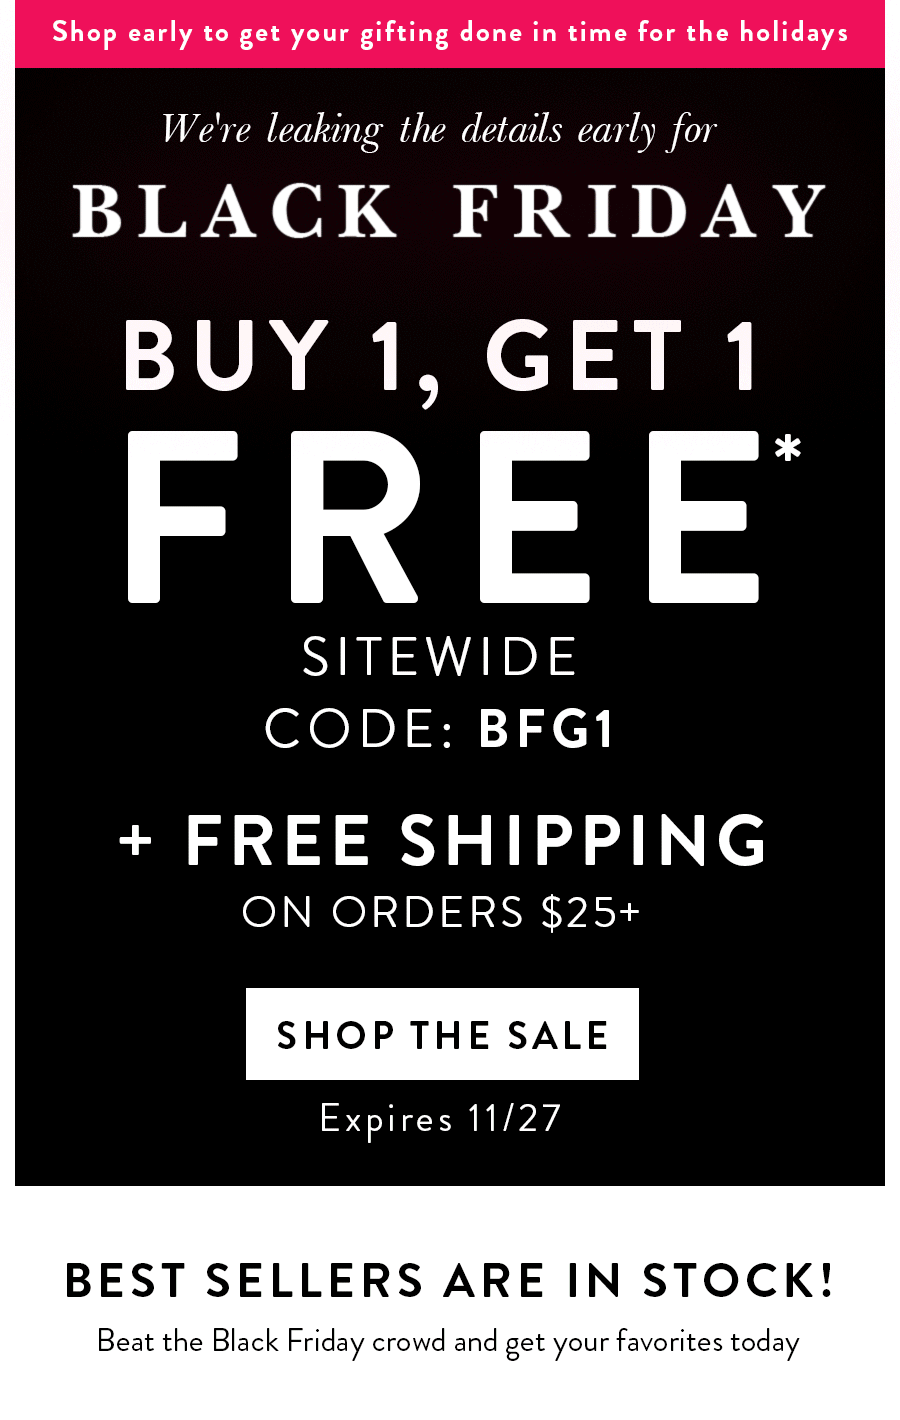 BUY 1, GET 1 FREE SITEWIDE + FREE SHIPPING